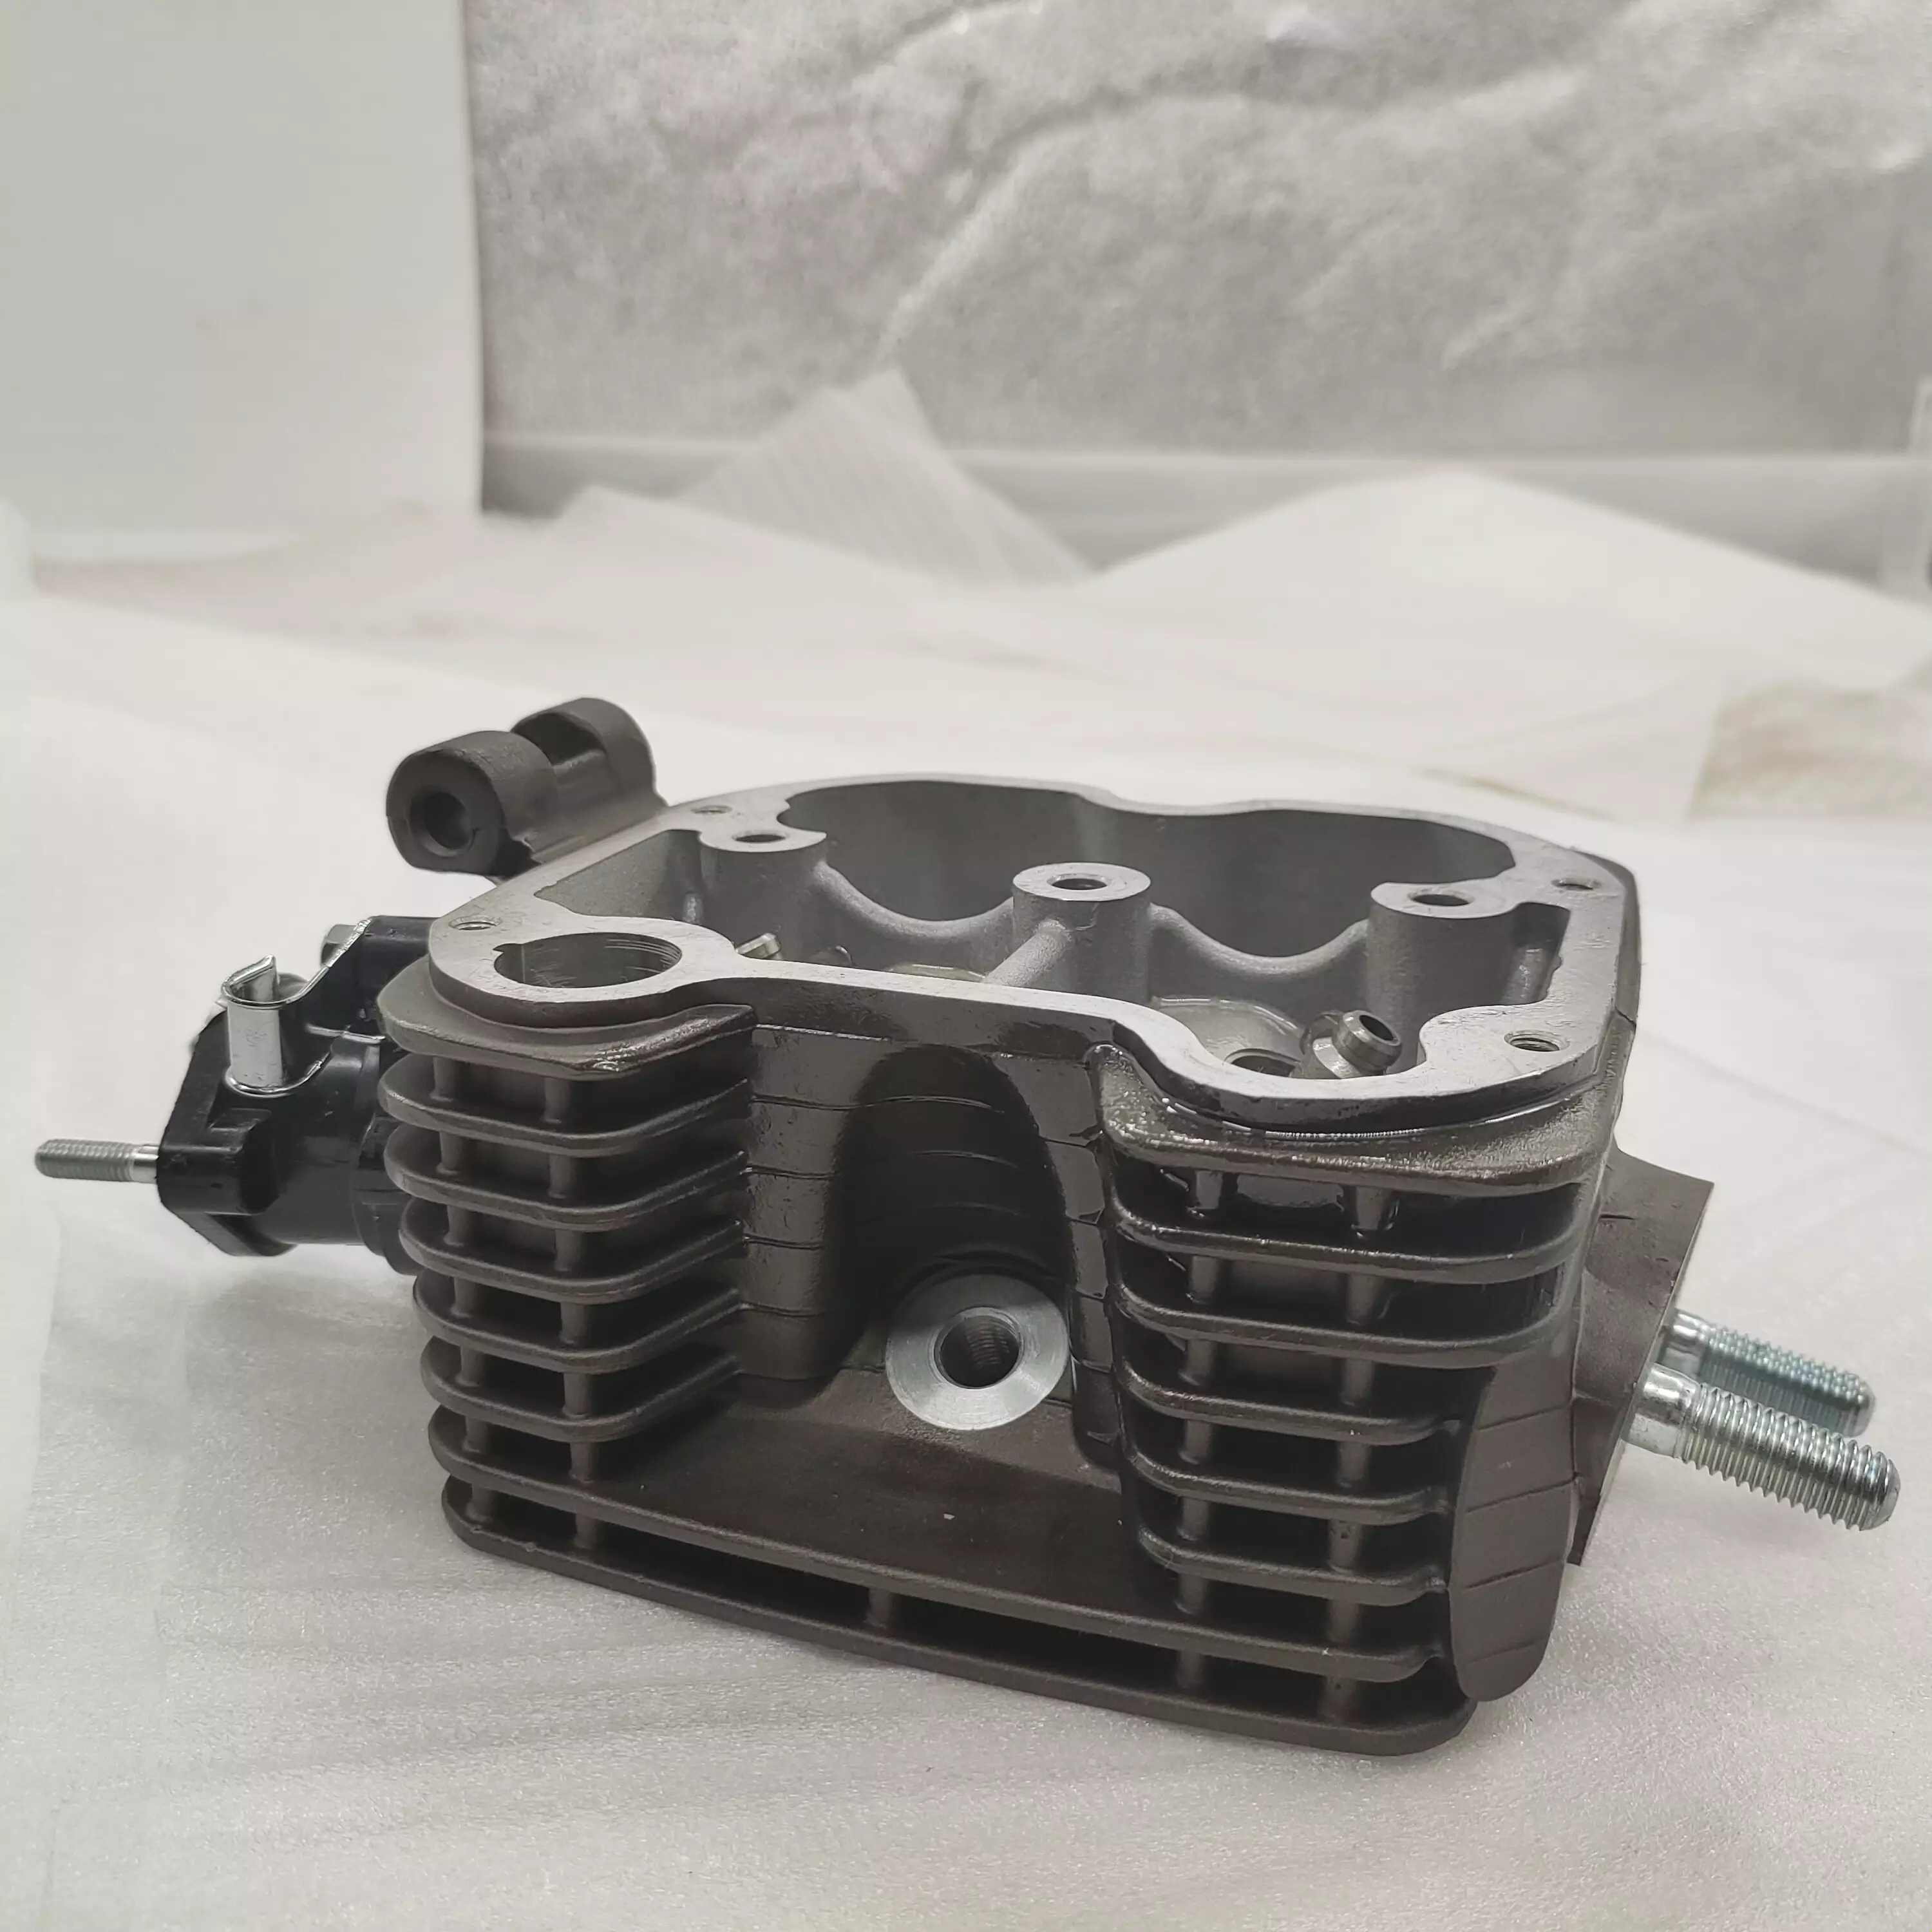 China factory new original motorcycle LIFAN parts tricycle 250cc water-cooled engine cylinder head high warranty product